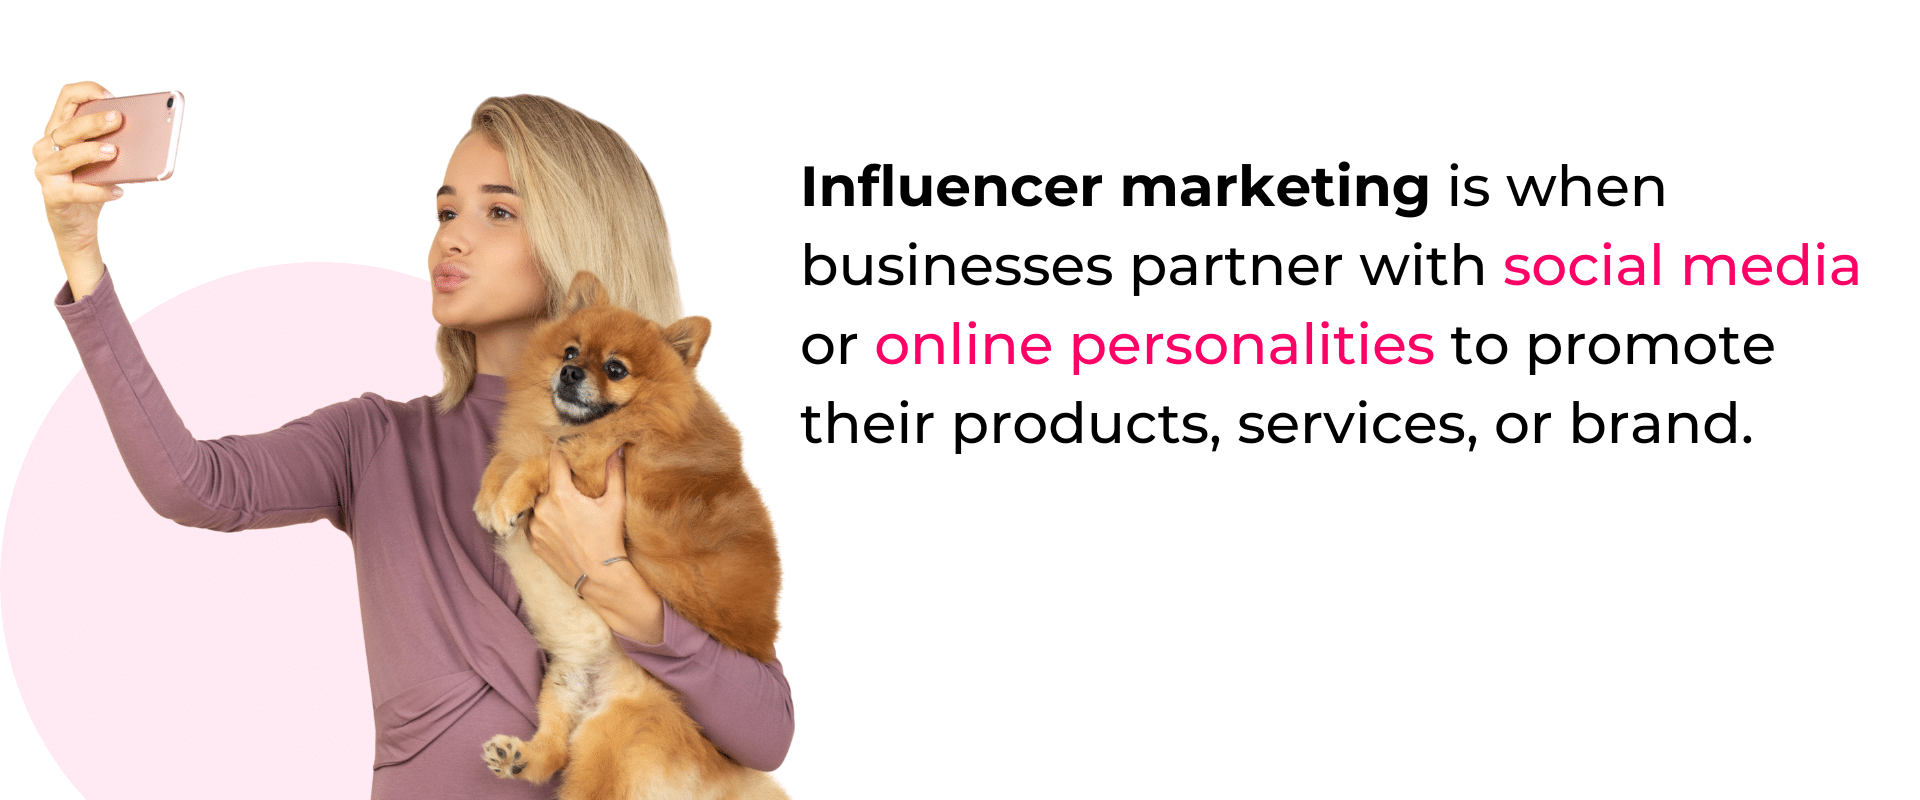 Influence marketing is when business partners partner with social media.